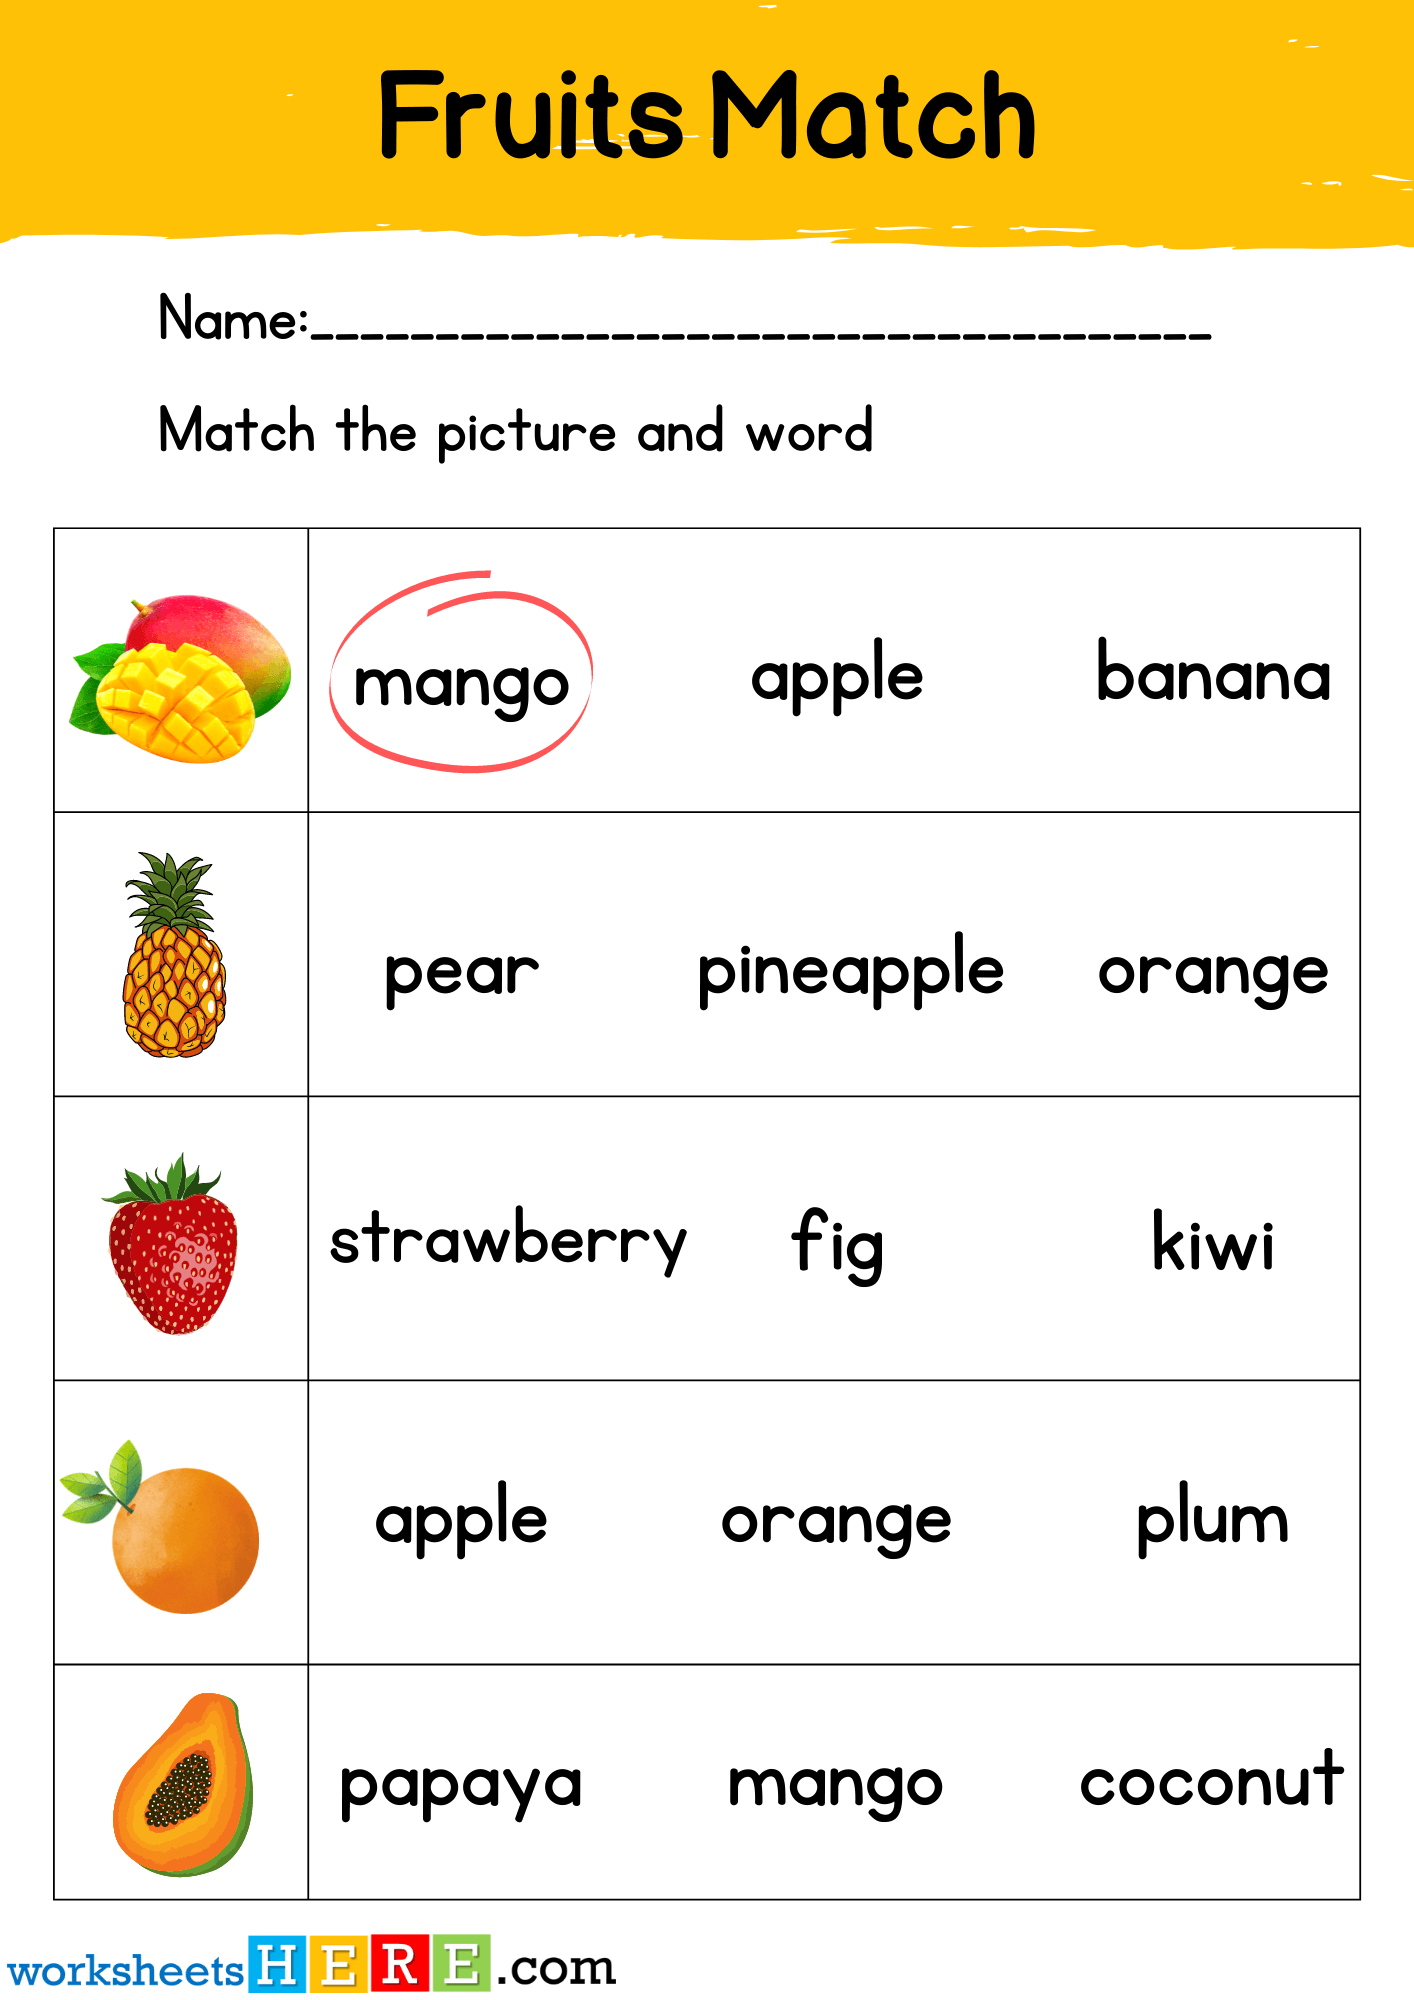 Fruits Names Match with Pictures Activity PDF Worksheet For Kindergarten